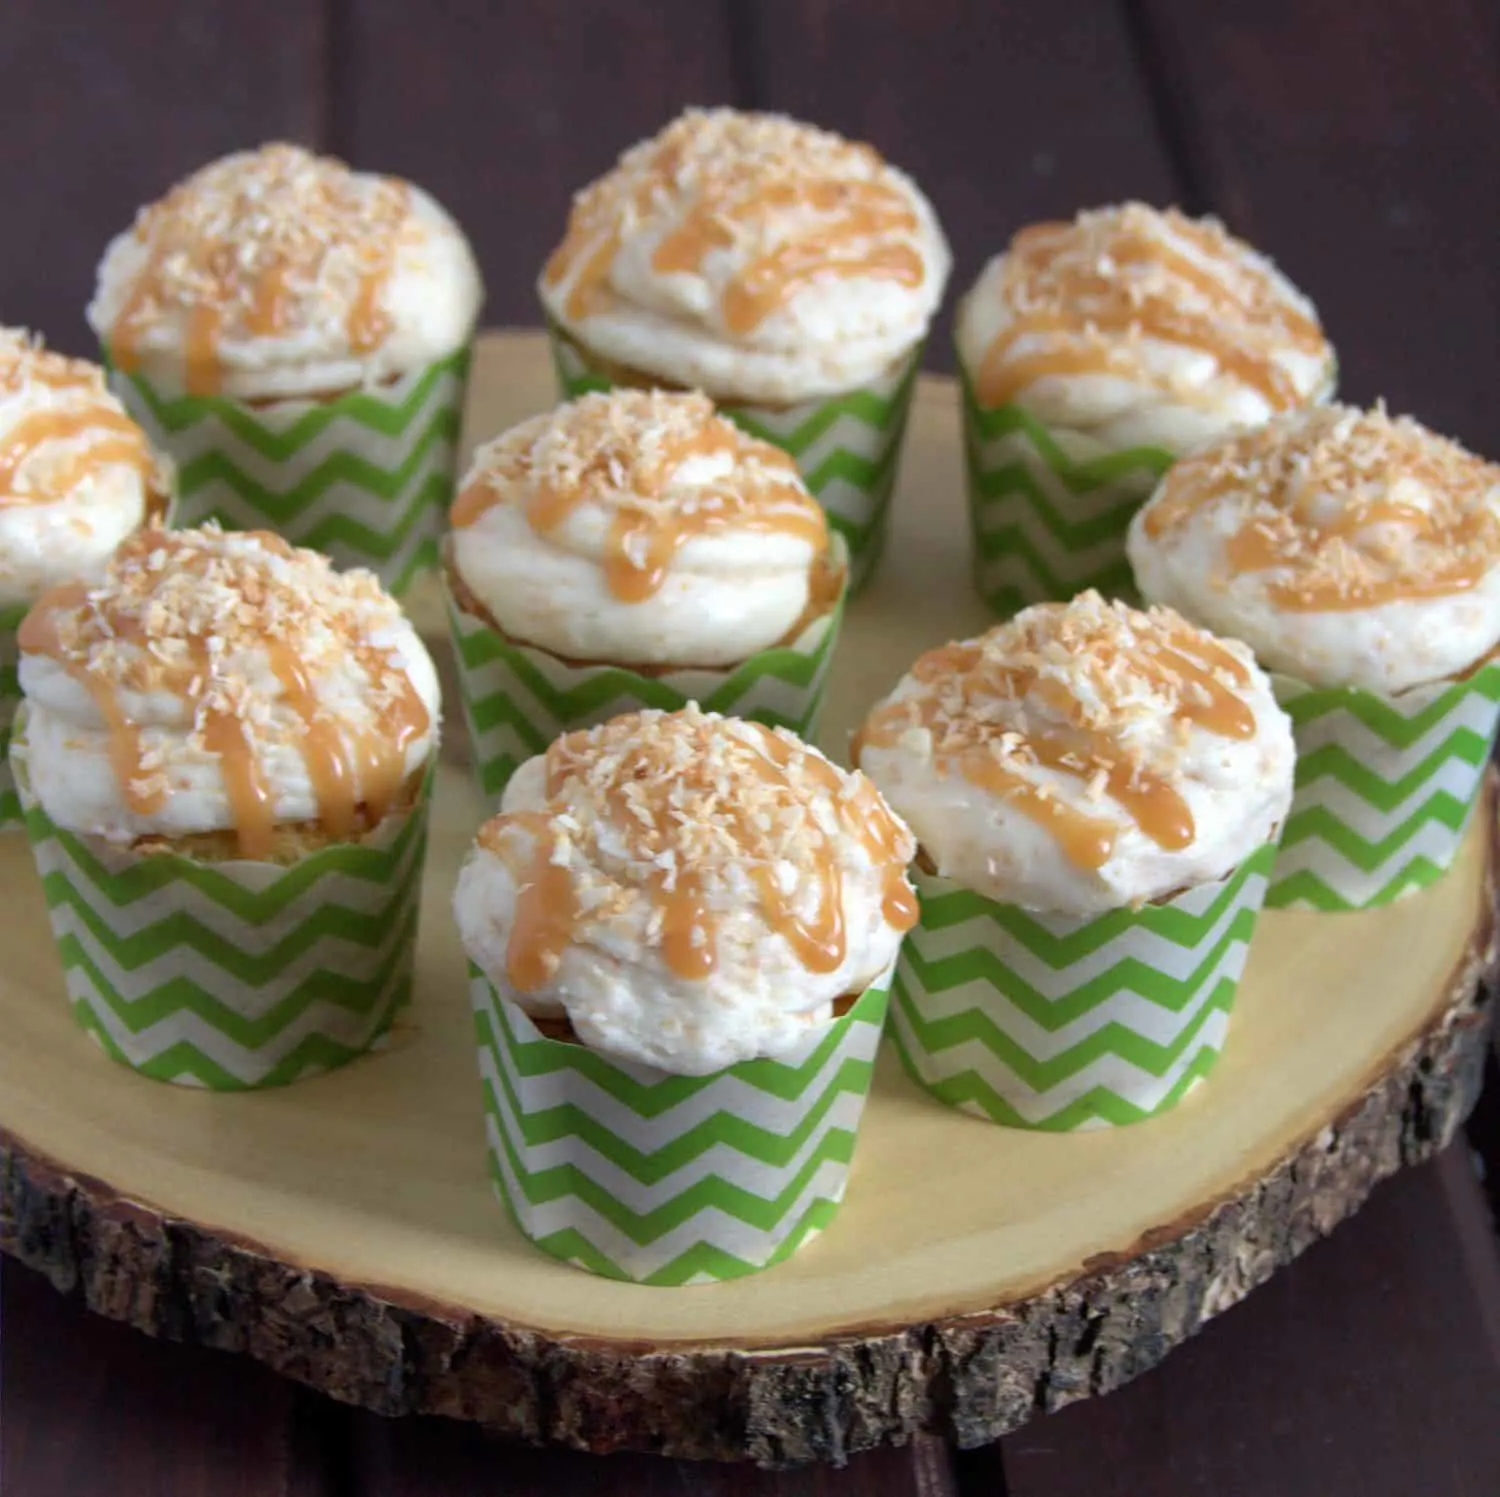 Coconut Caramel Cupcake Recipe - delicious, and not too sweet!